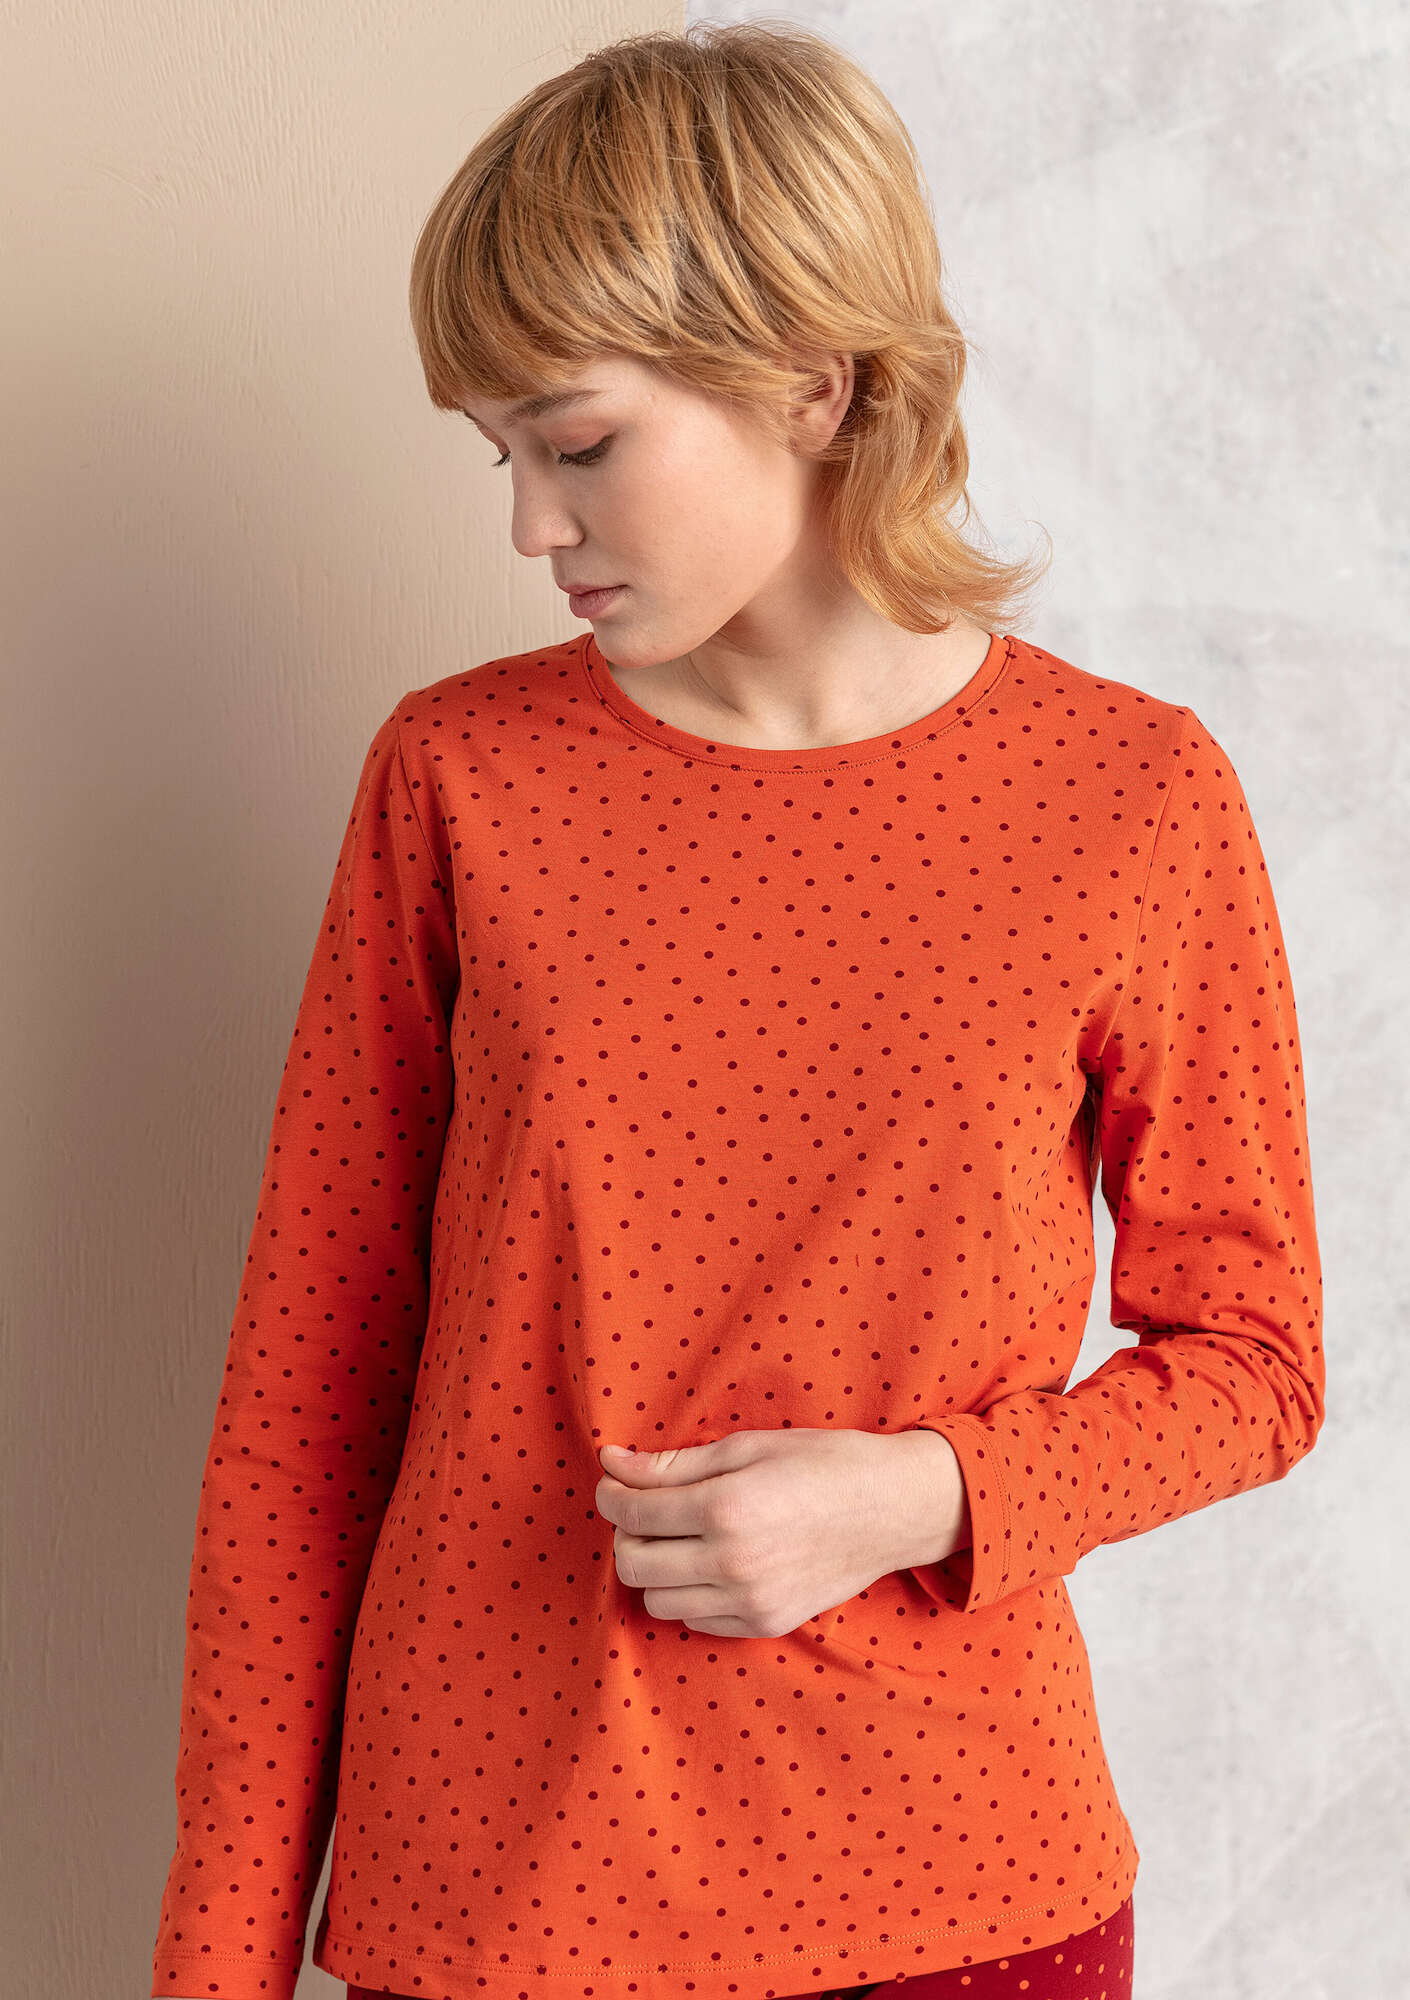 Pytte jersey top chili/patterned